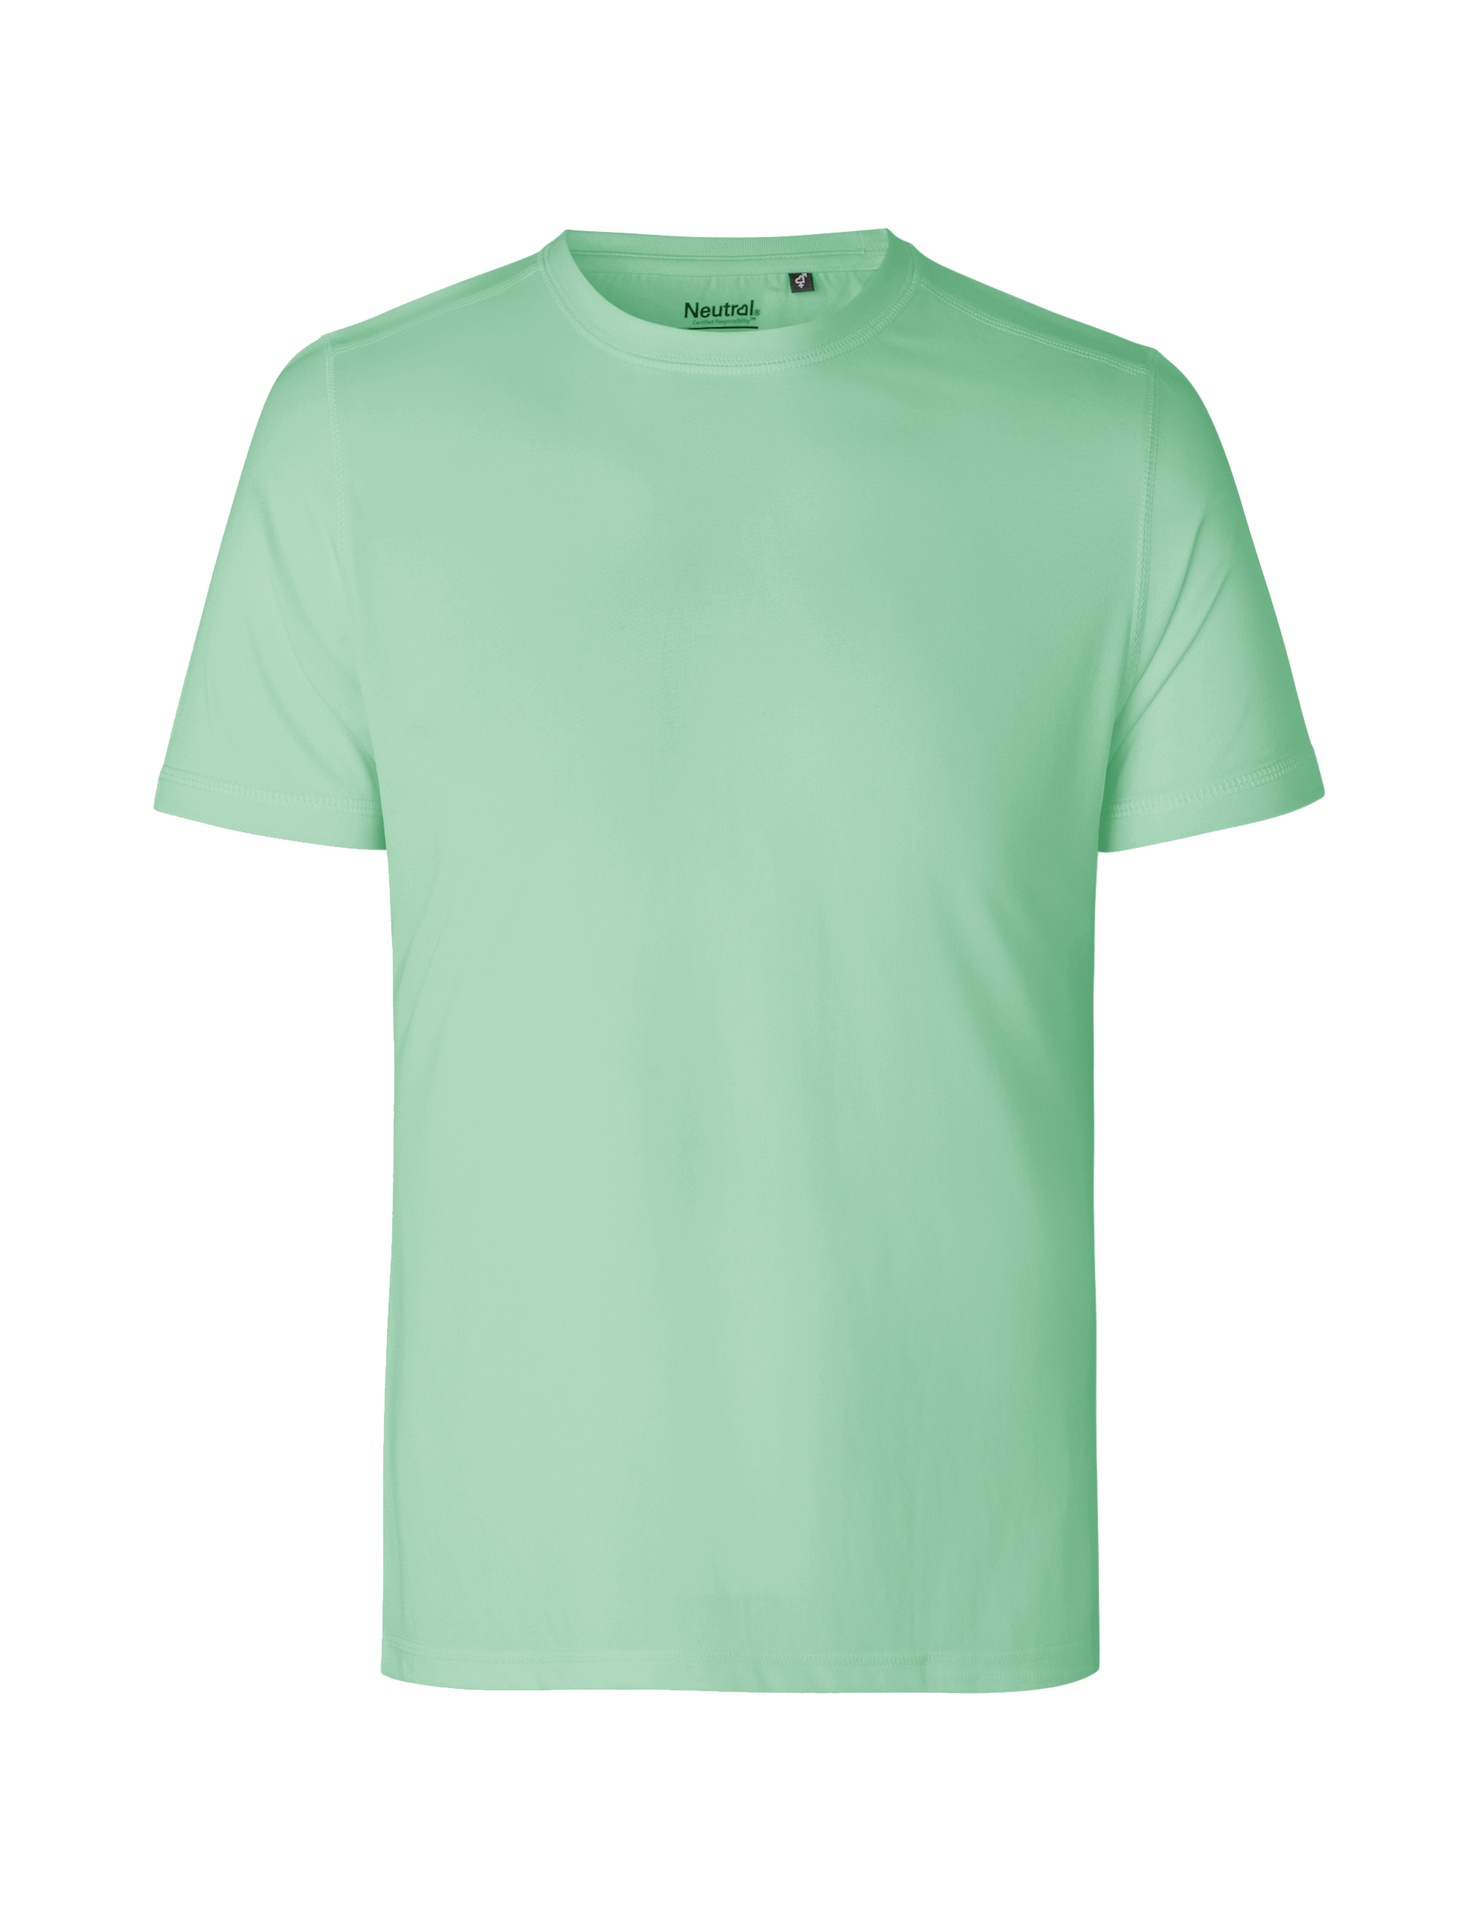 [PR/03796] Recycled Performance T-Shirt (Dusty Mint 40, S)